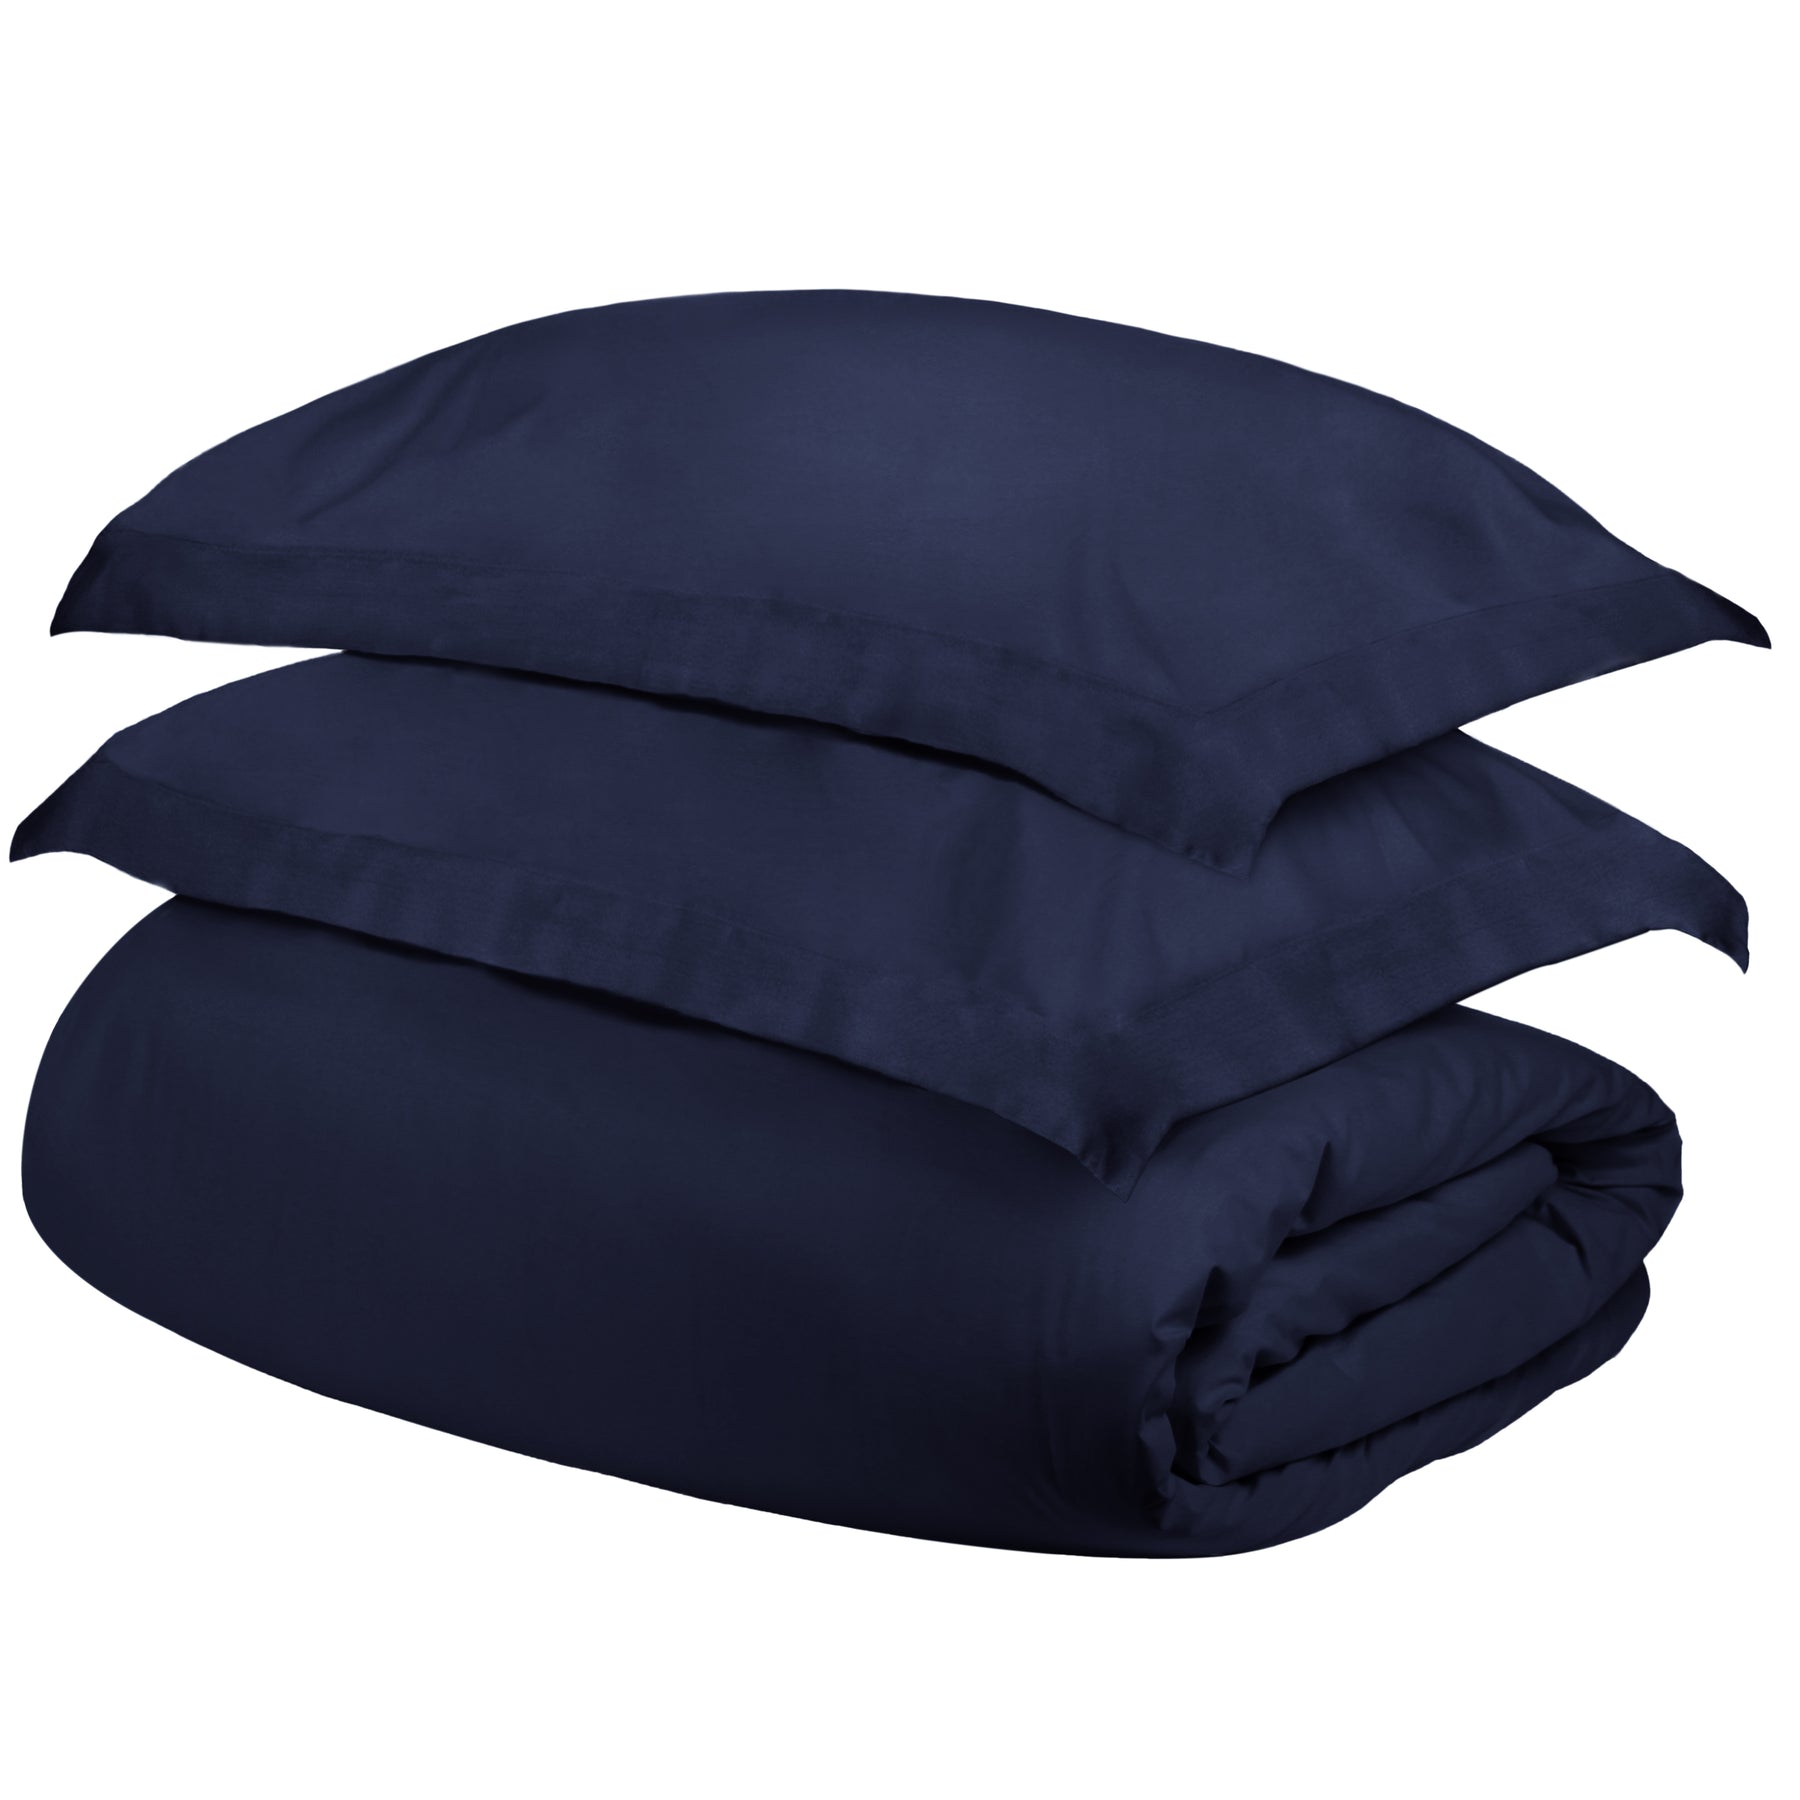 Superior Egyptian Cotton 300 Thread Count Solid Duvet Cover Set - Navy Blue